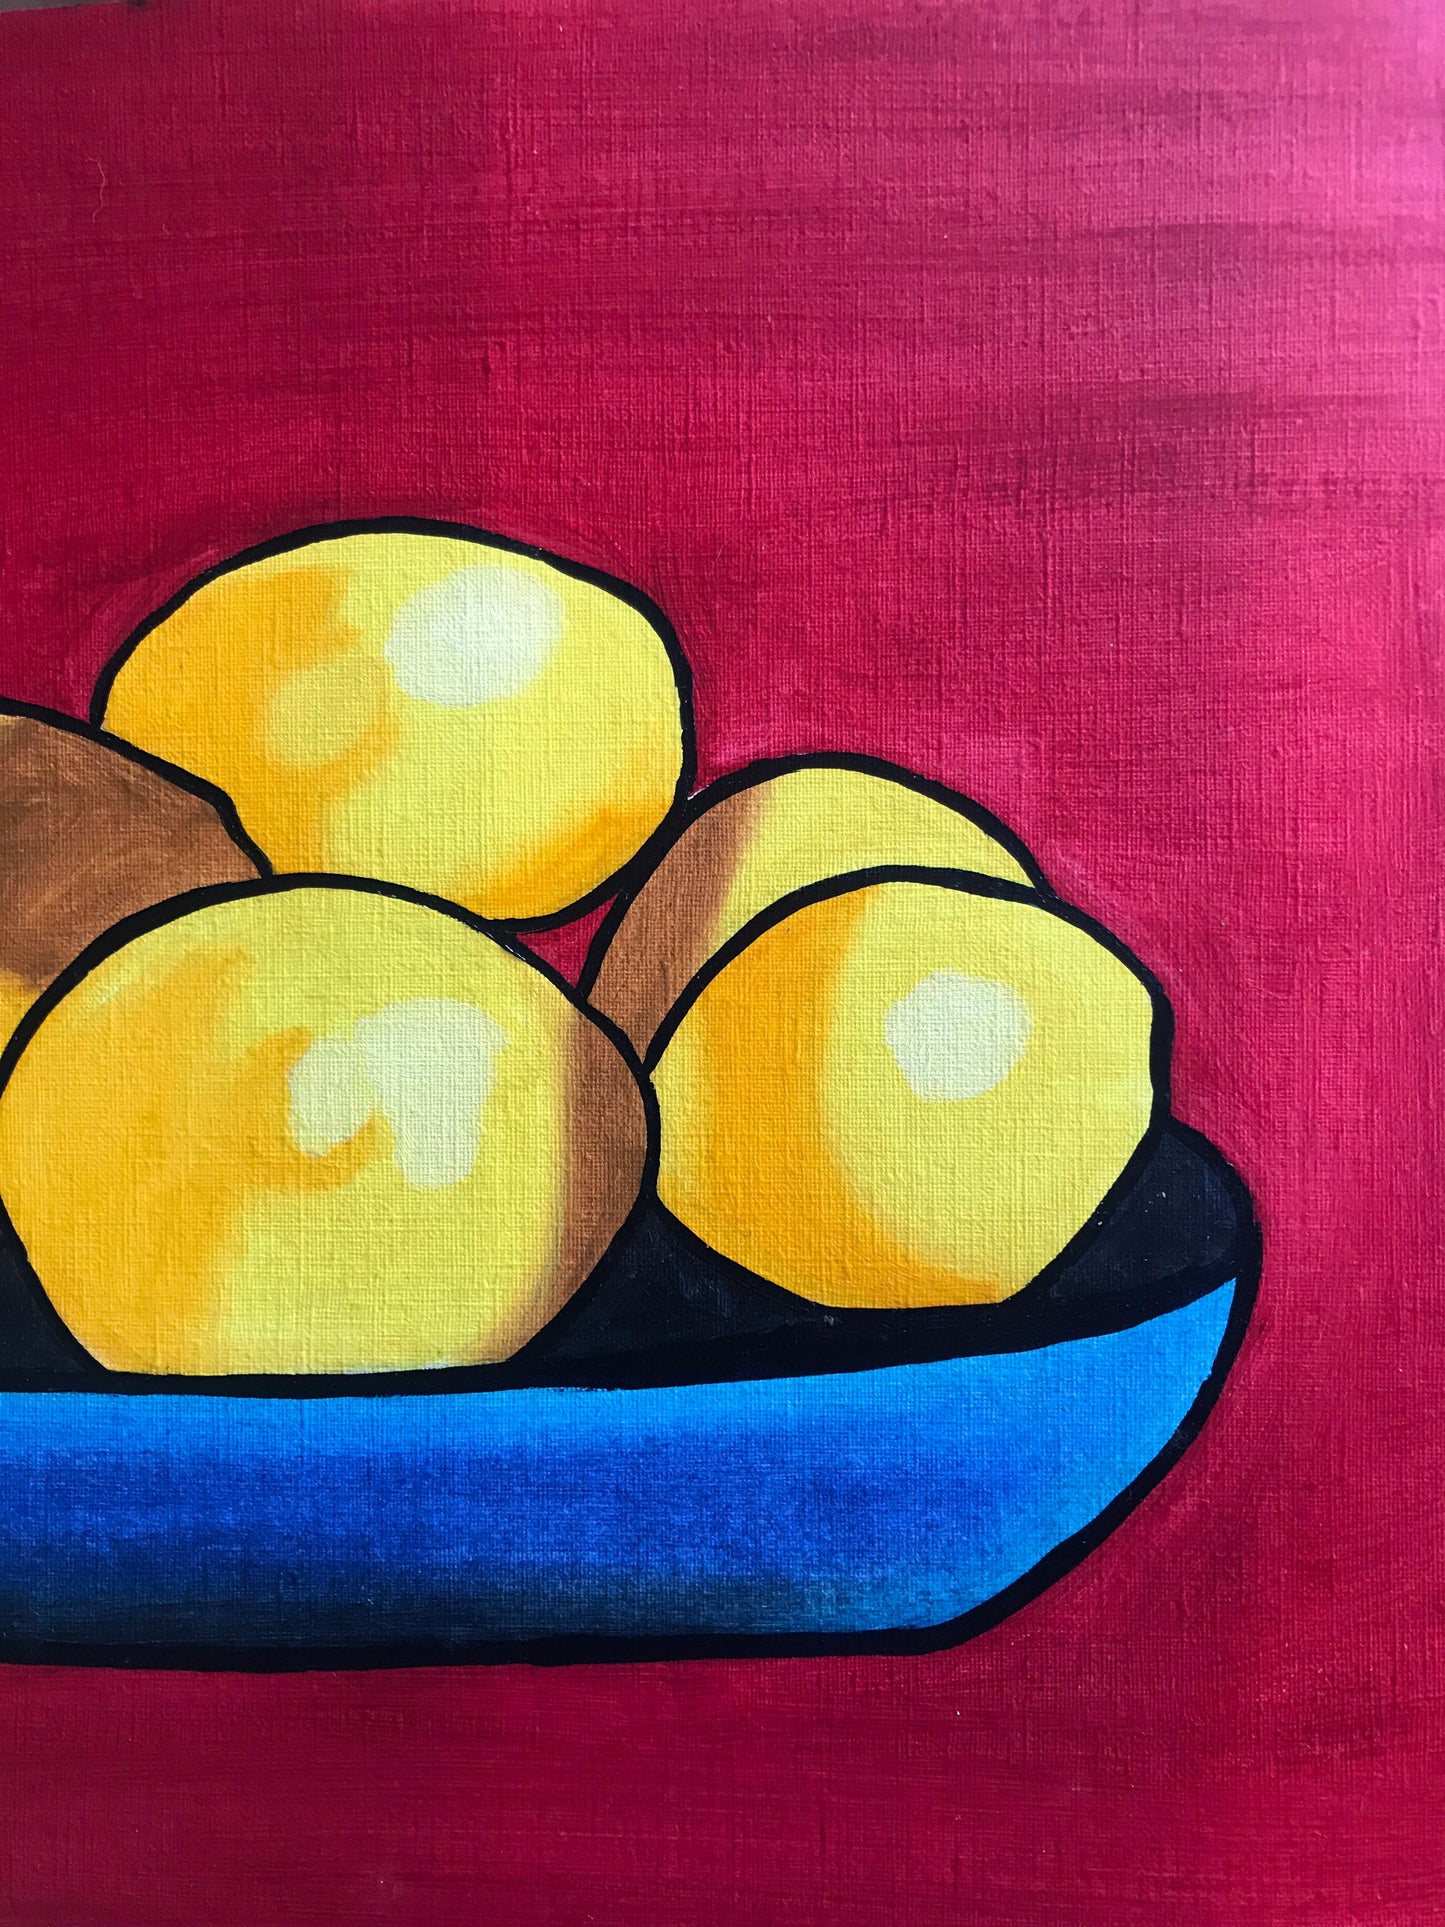 A happy art painting of yellow lemons in a blue plate against a red background